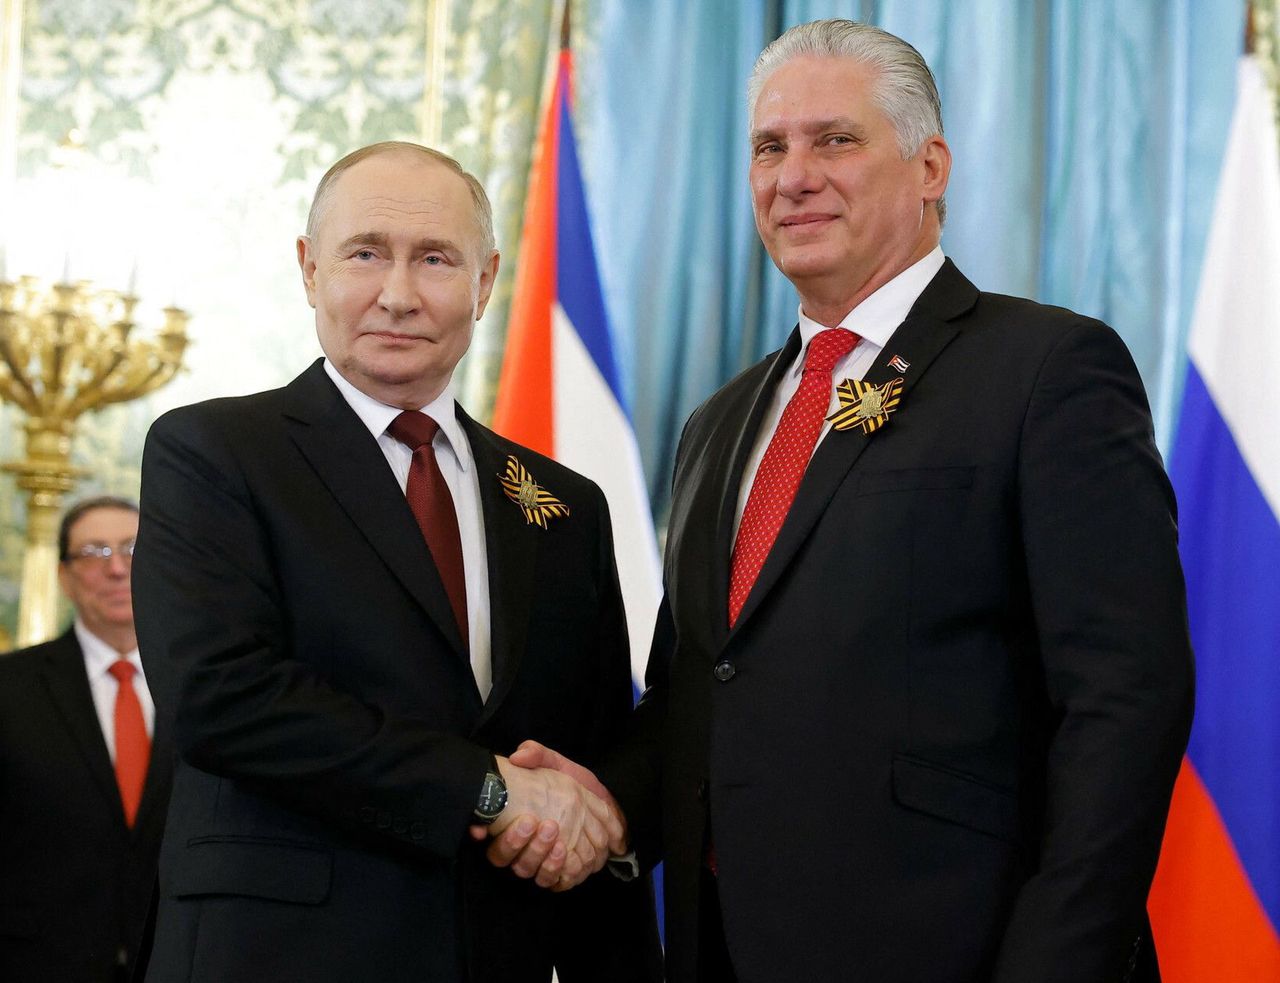 Vladimir Putin and the President of Cuba Miguel Diaz-Canel